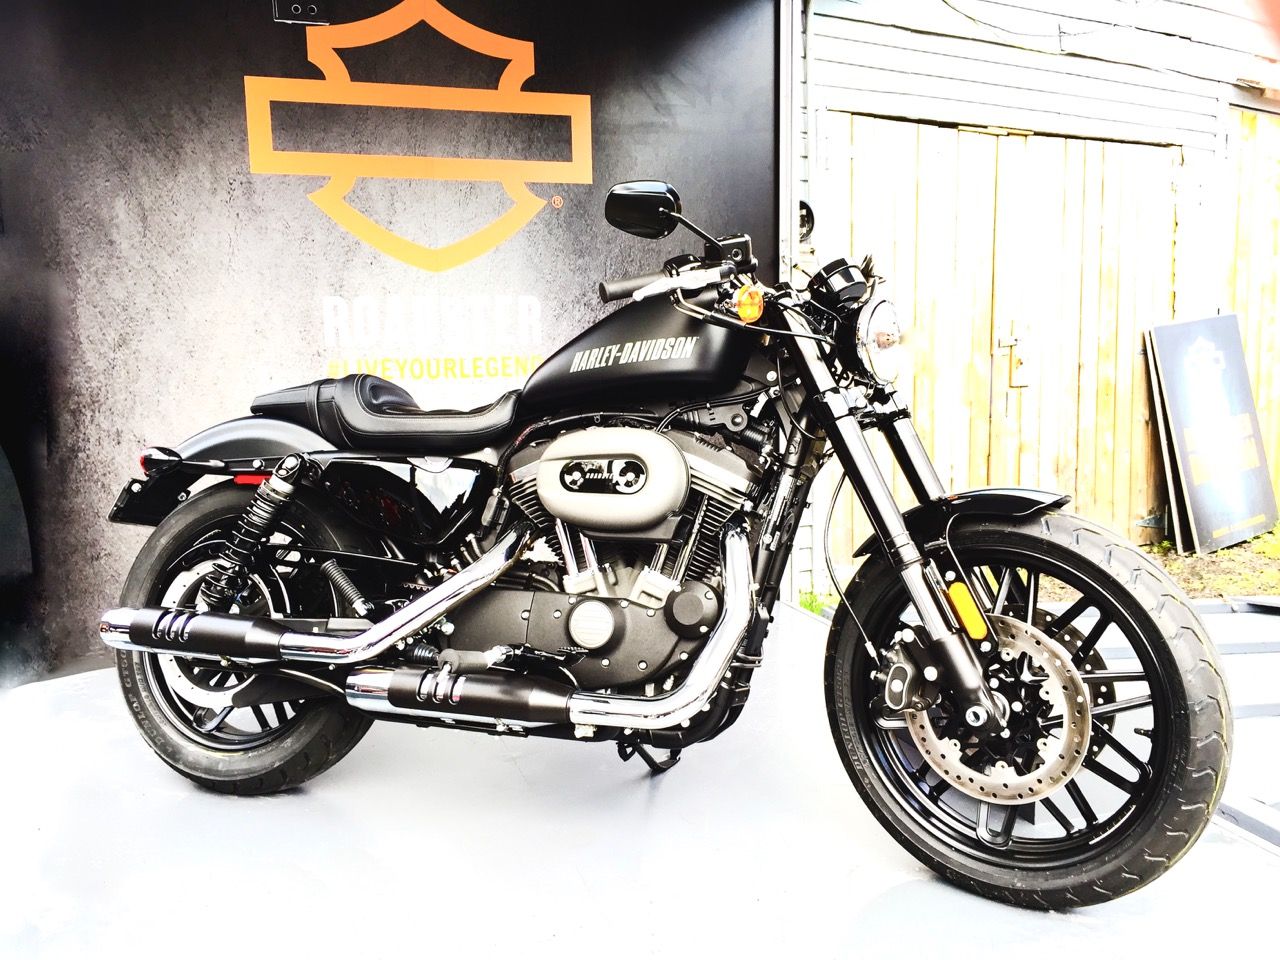 2016 Harley-Davidson Sportster Roadster: a profile reminiscent of racing Sportsters from the 1950s